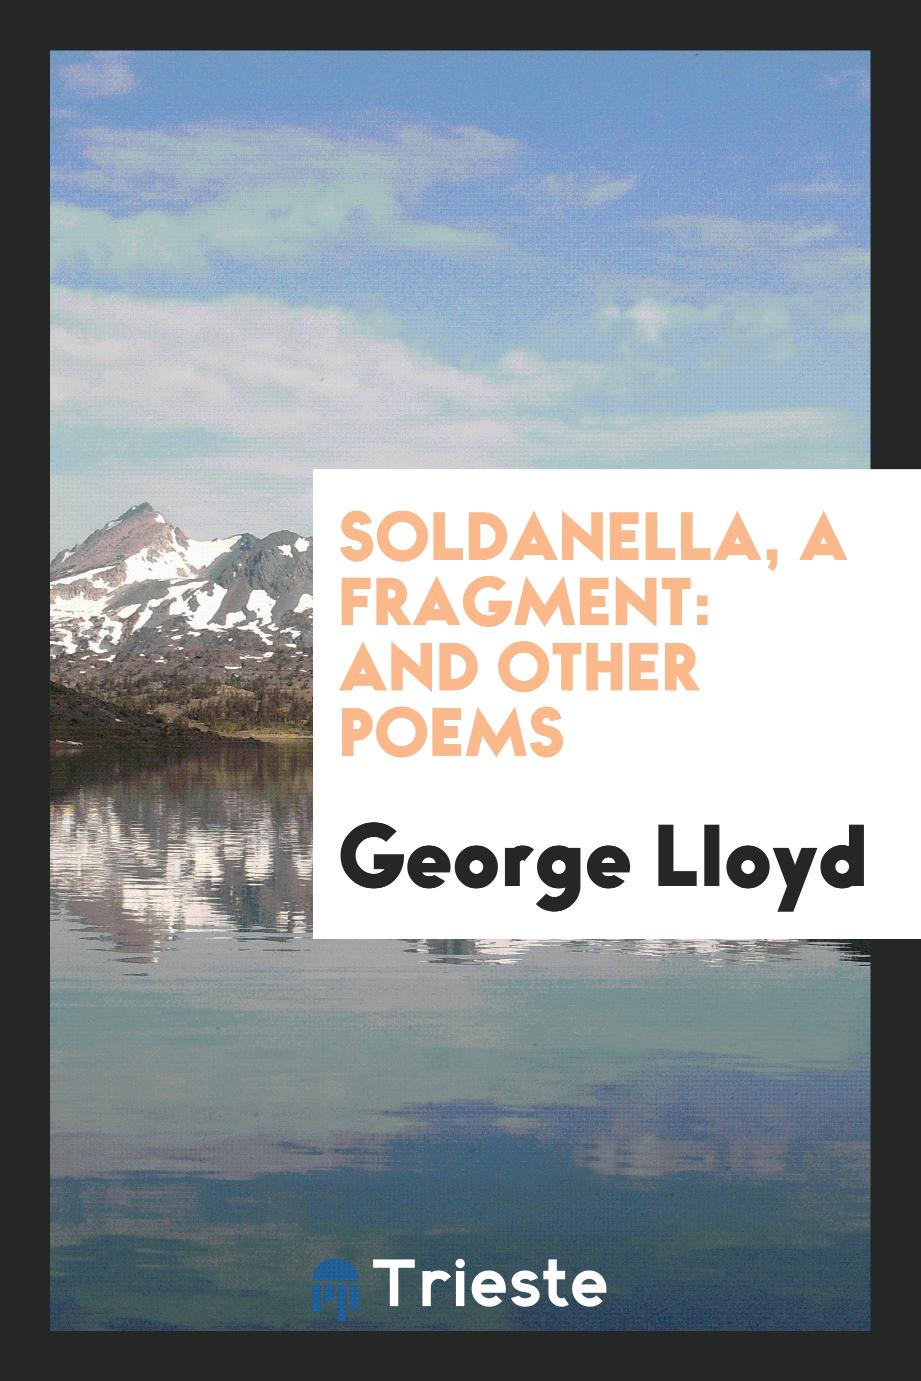 Soldanella, a fragment: and other poems